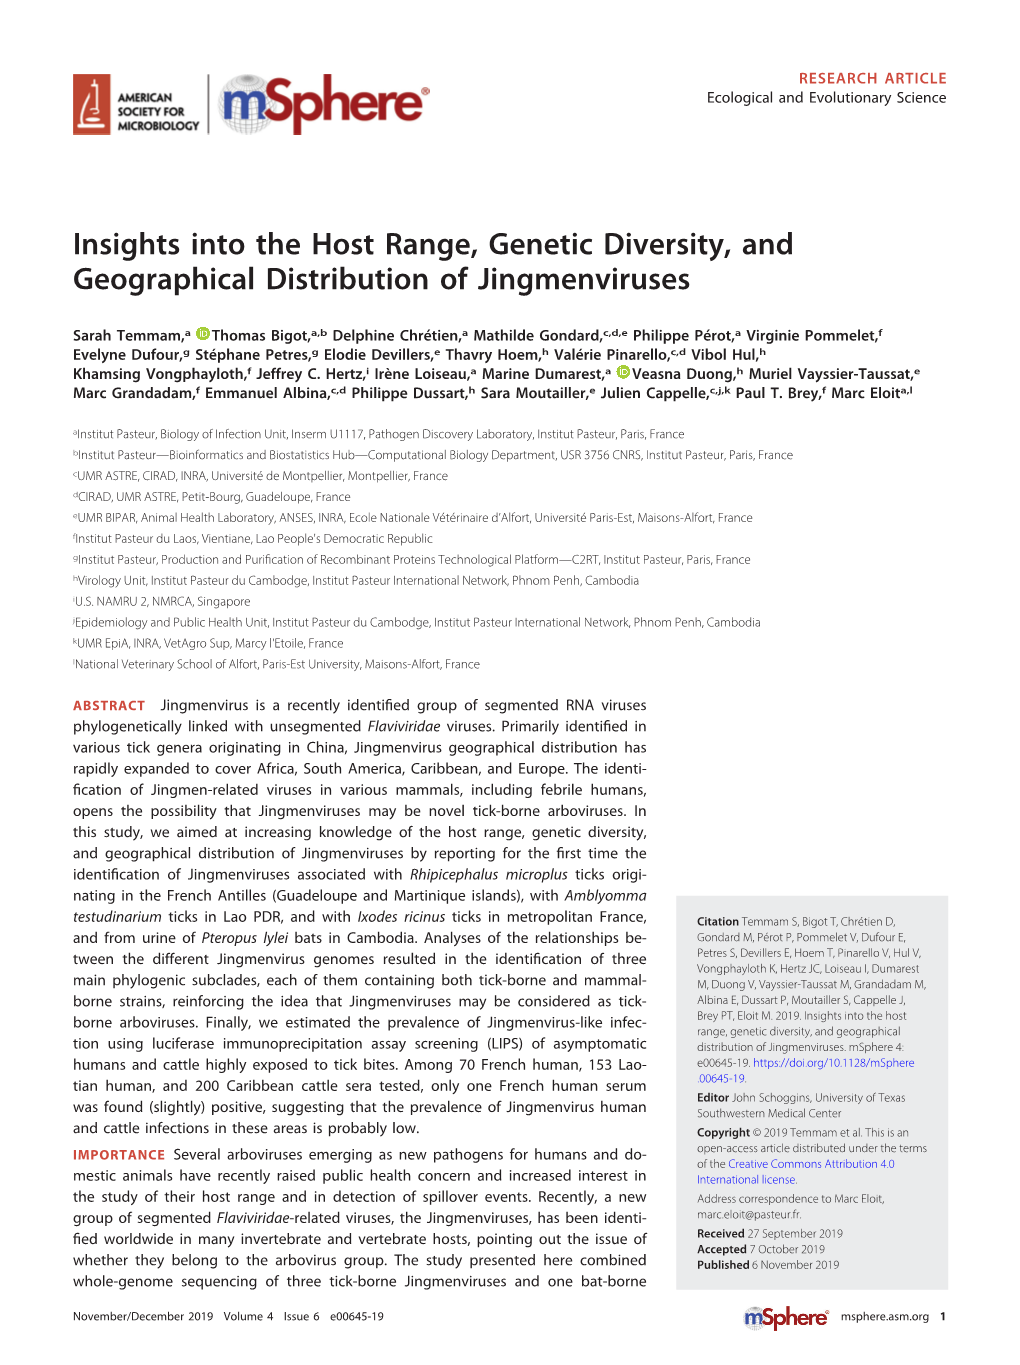 Insights Into the Host Range, Genetic Diversity, and Geographical Distribution of Jingmenviruses